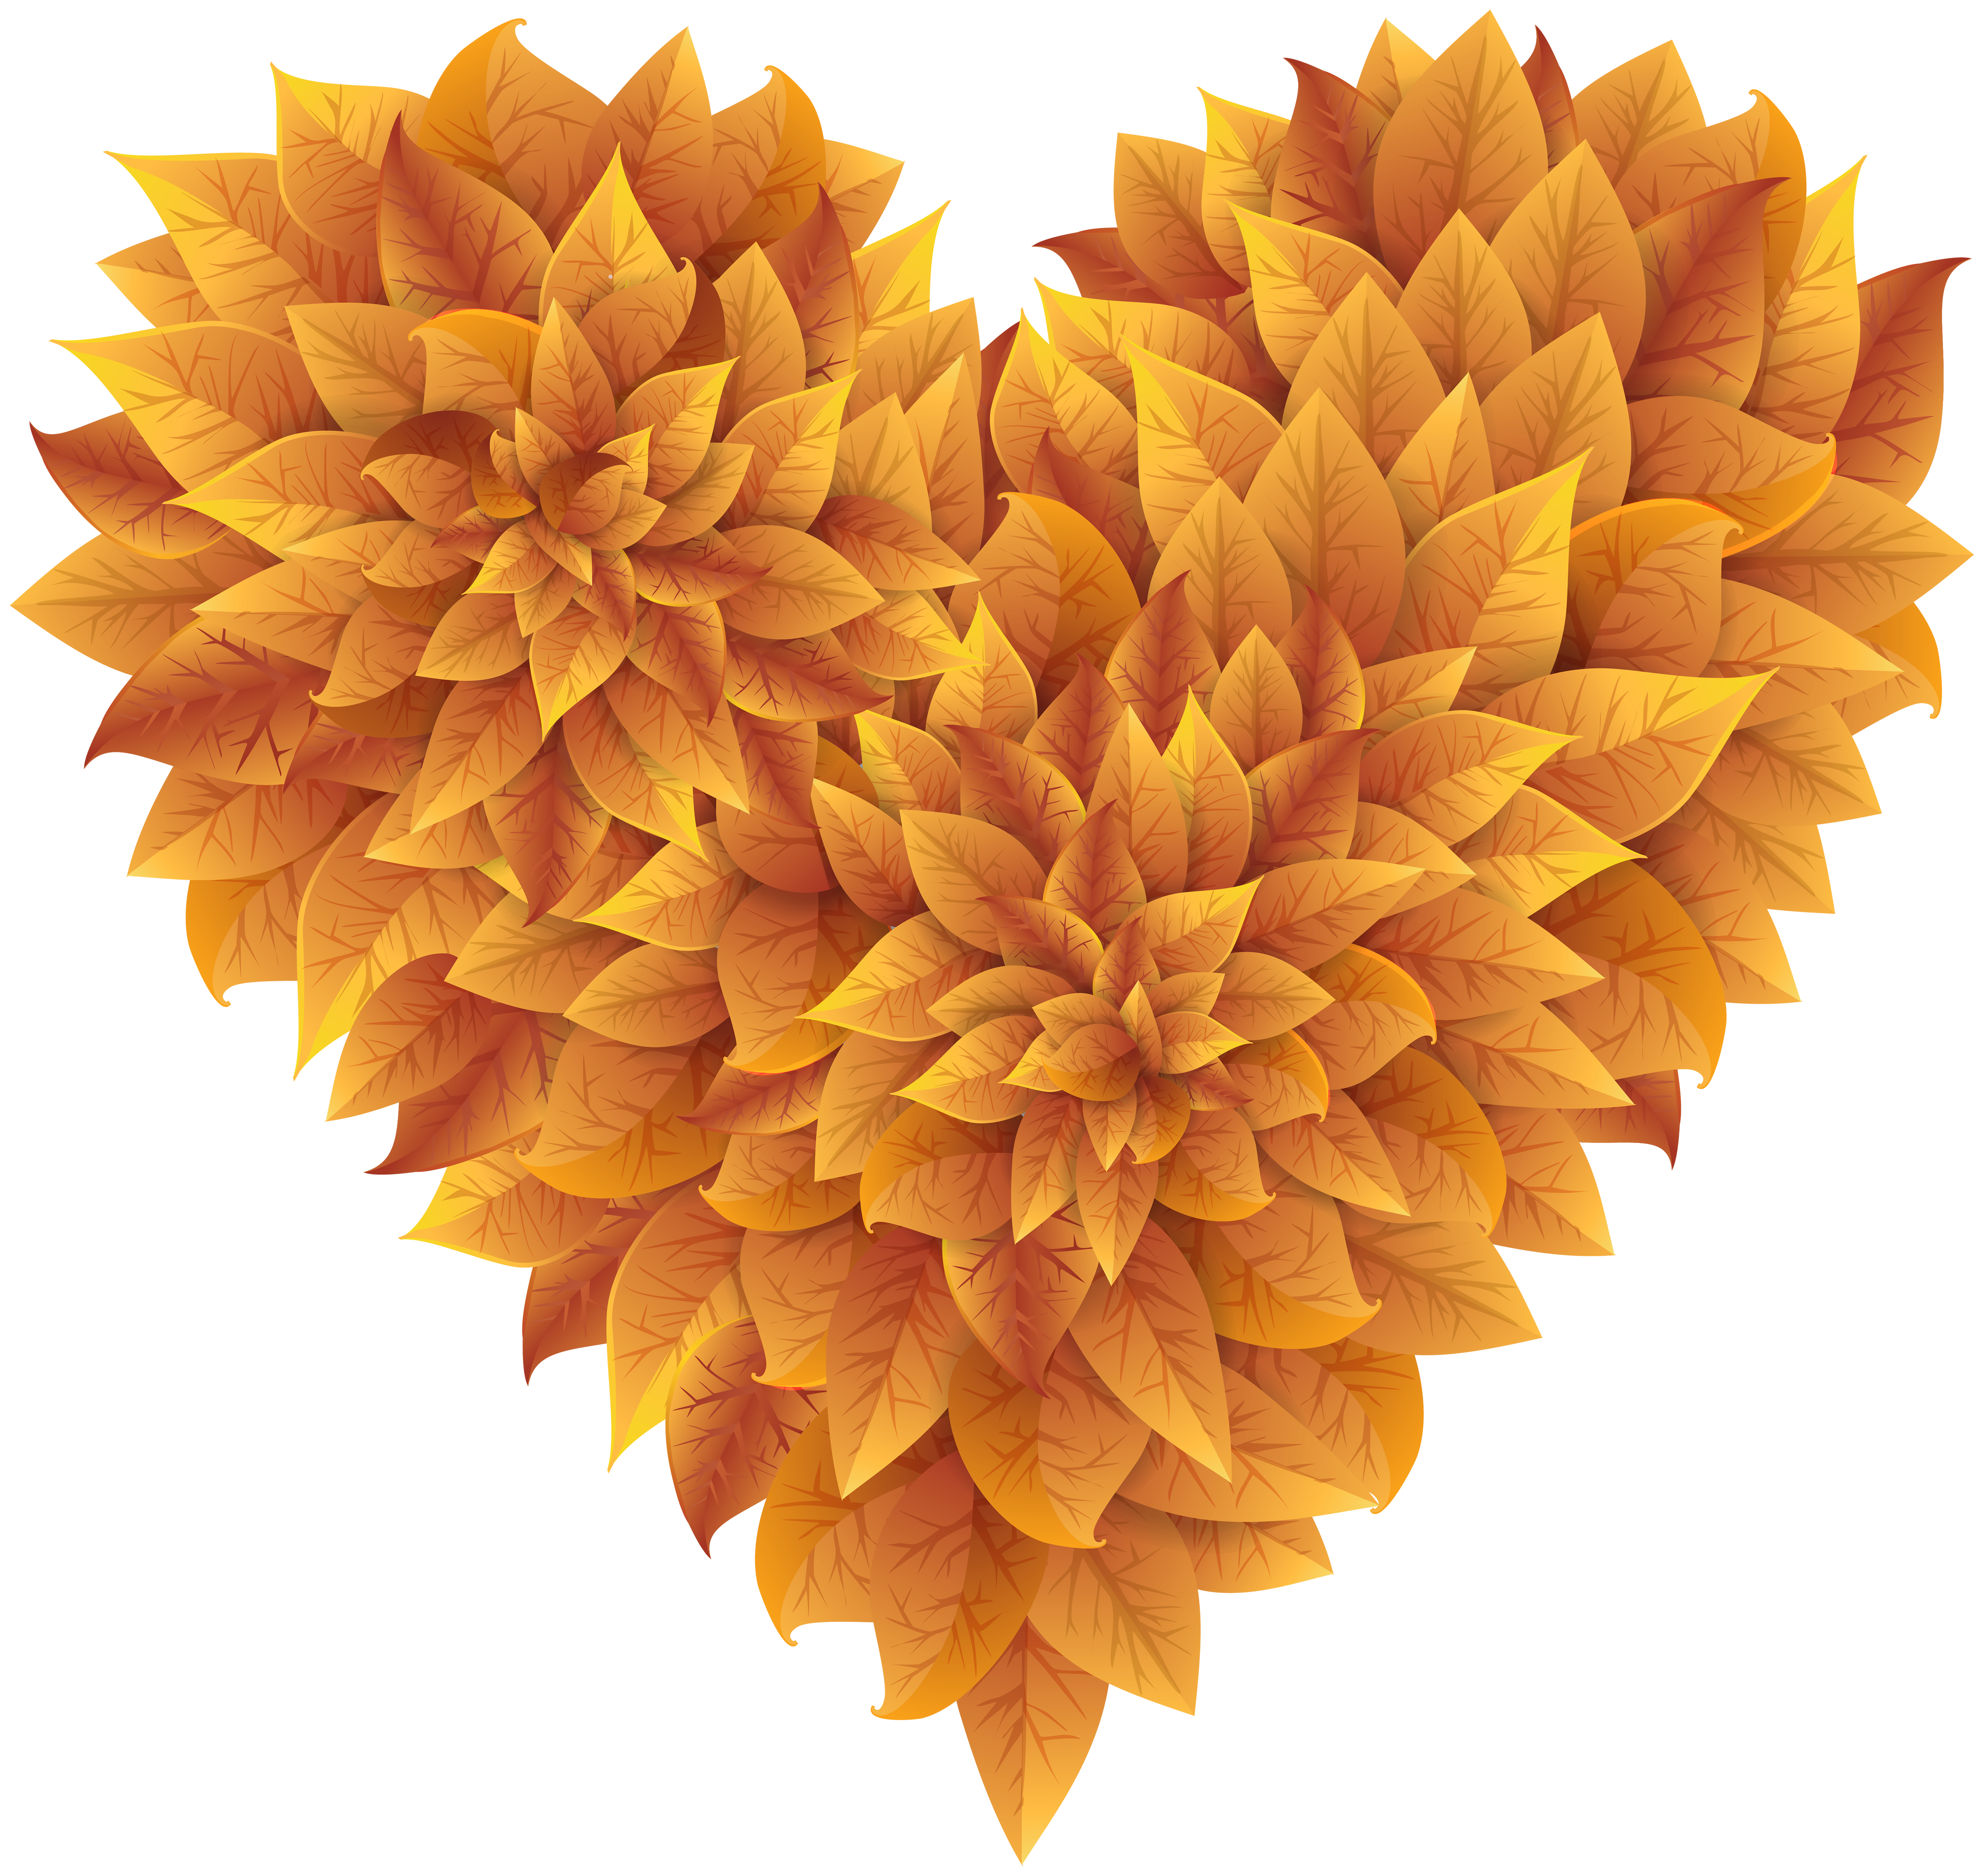 Autumn Leaves Heart Clipart PNG Image